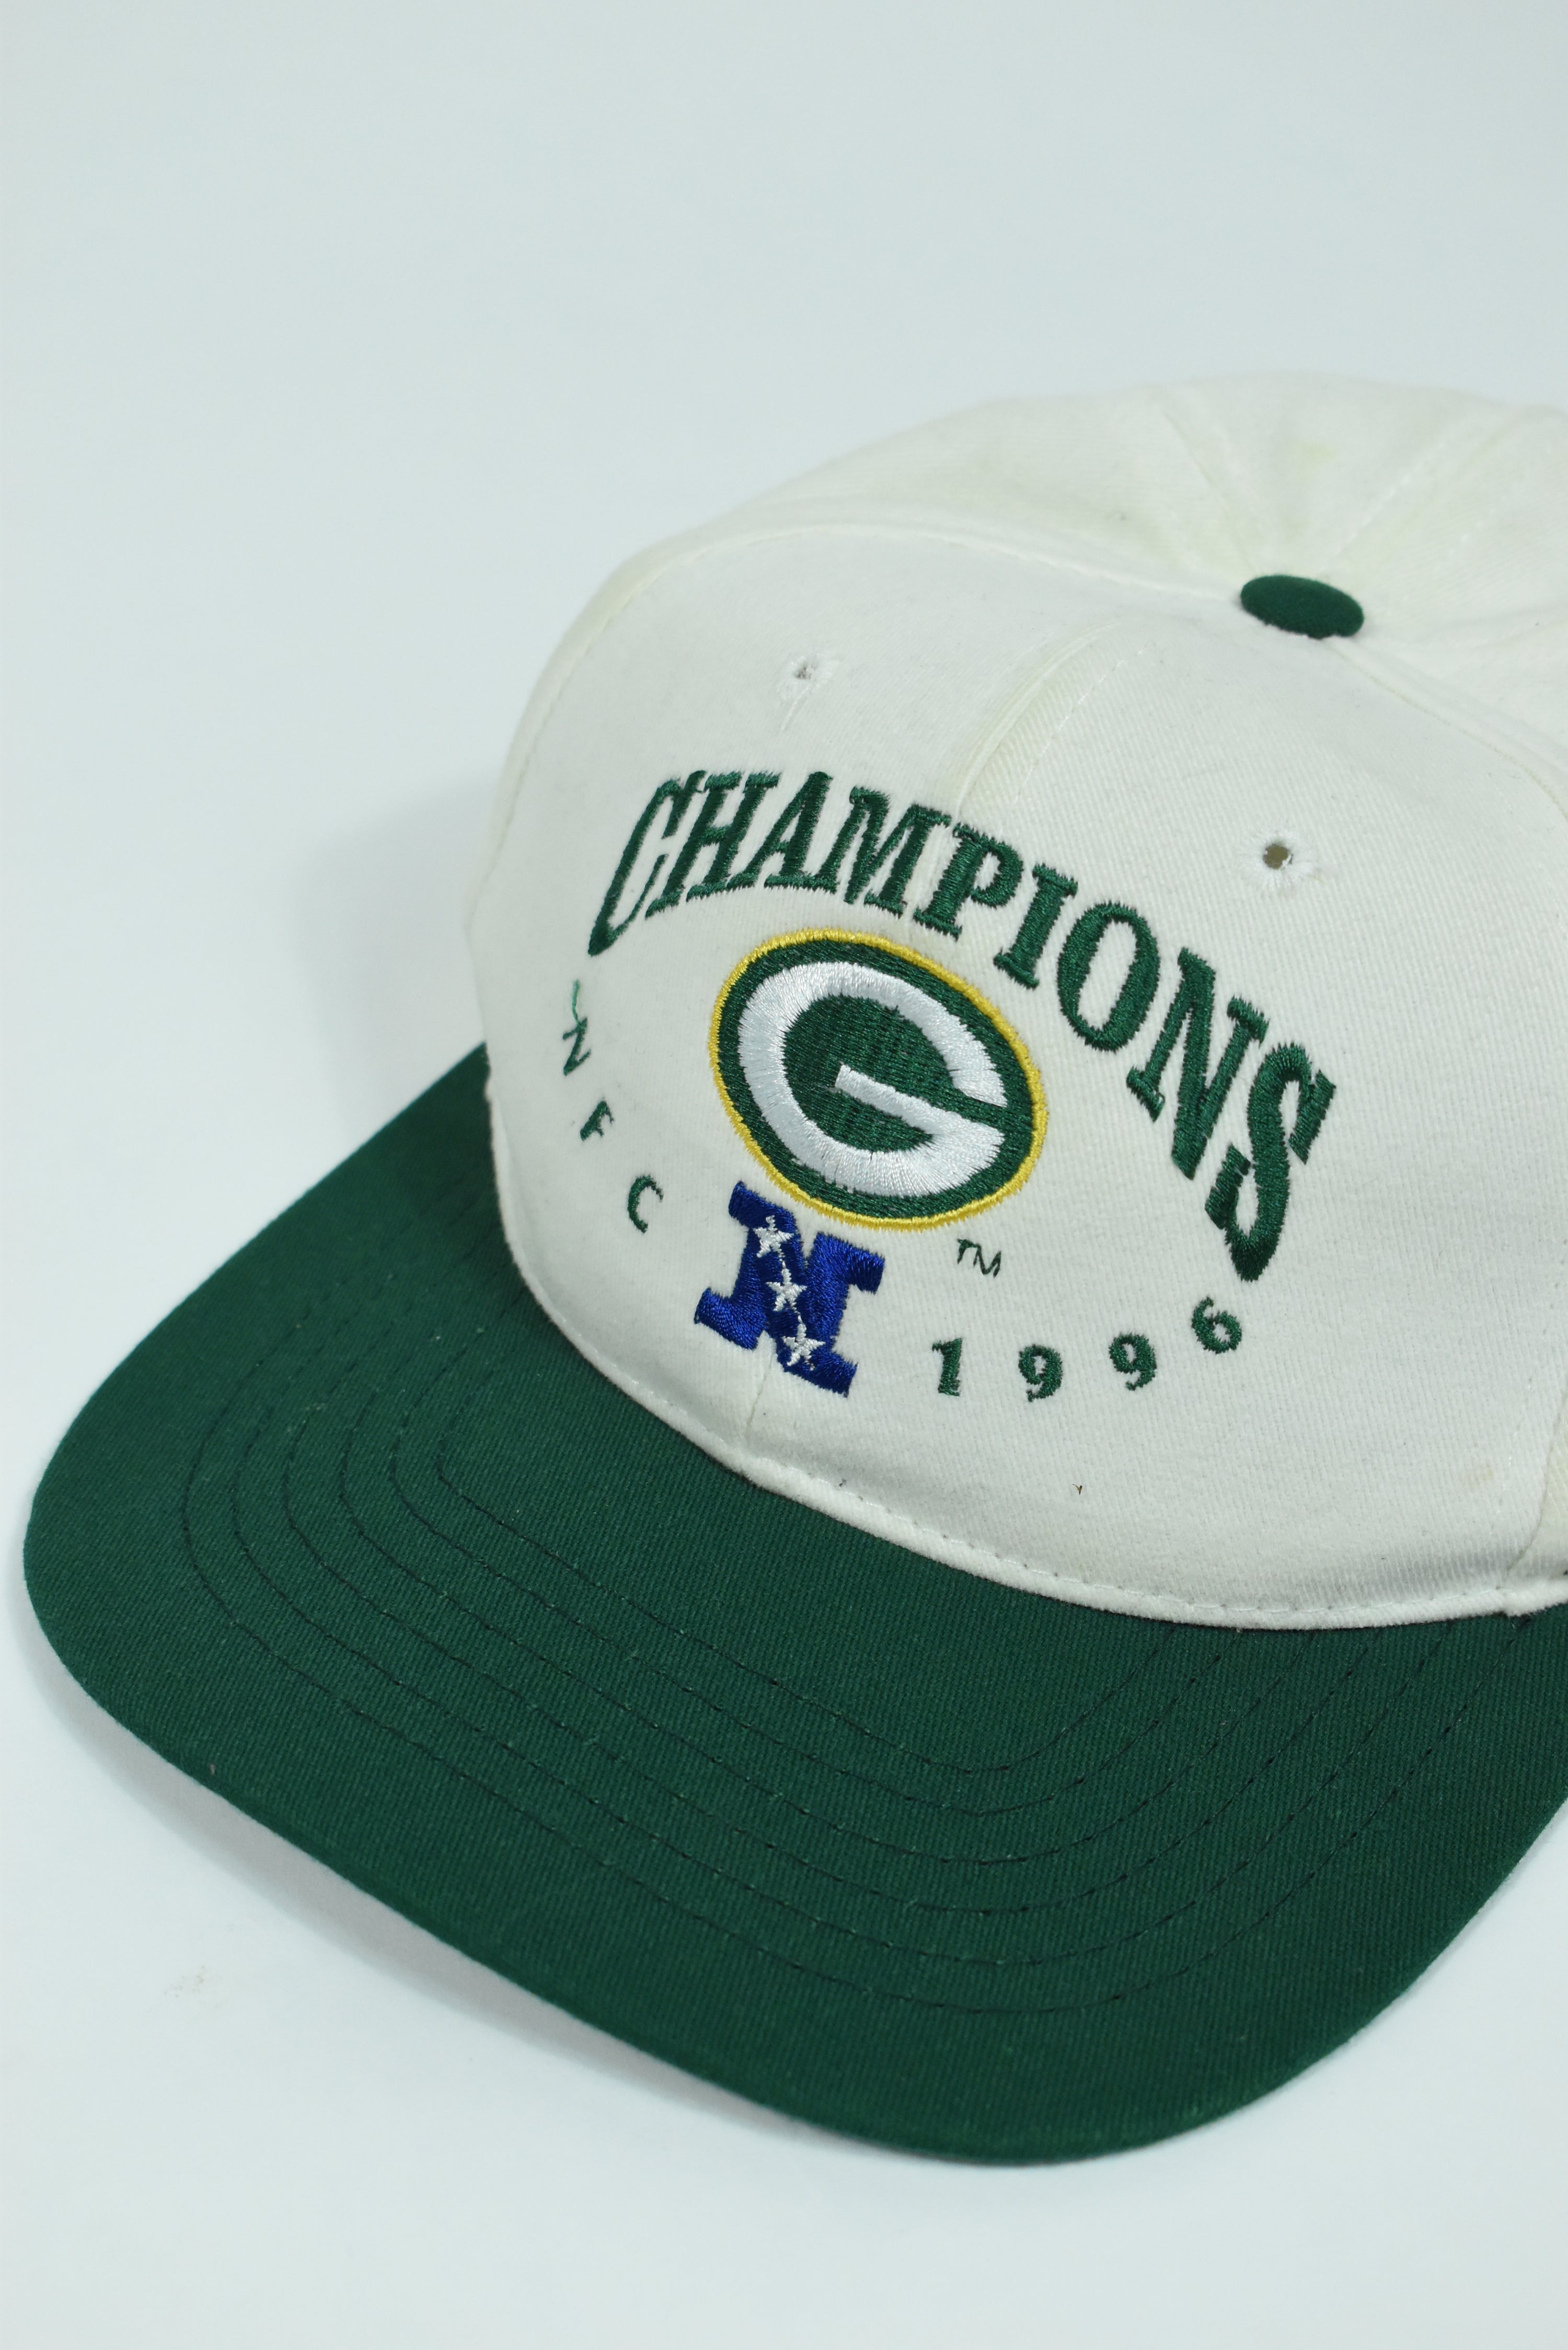 Vintage Green Bay Packers 1996 Embroidery Hat OS